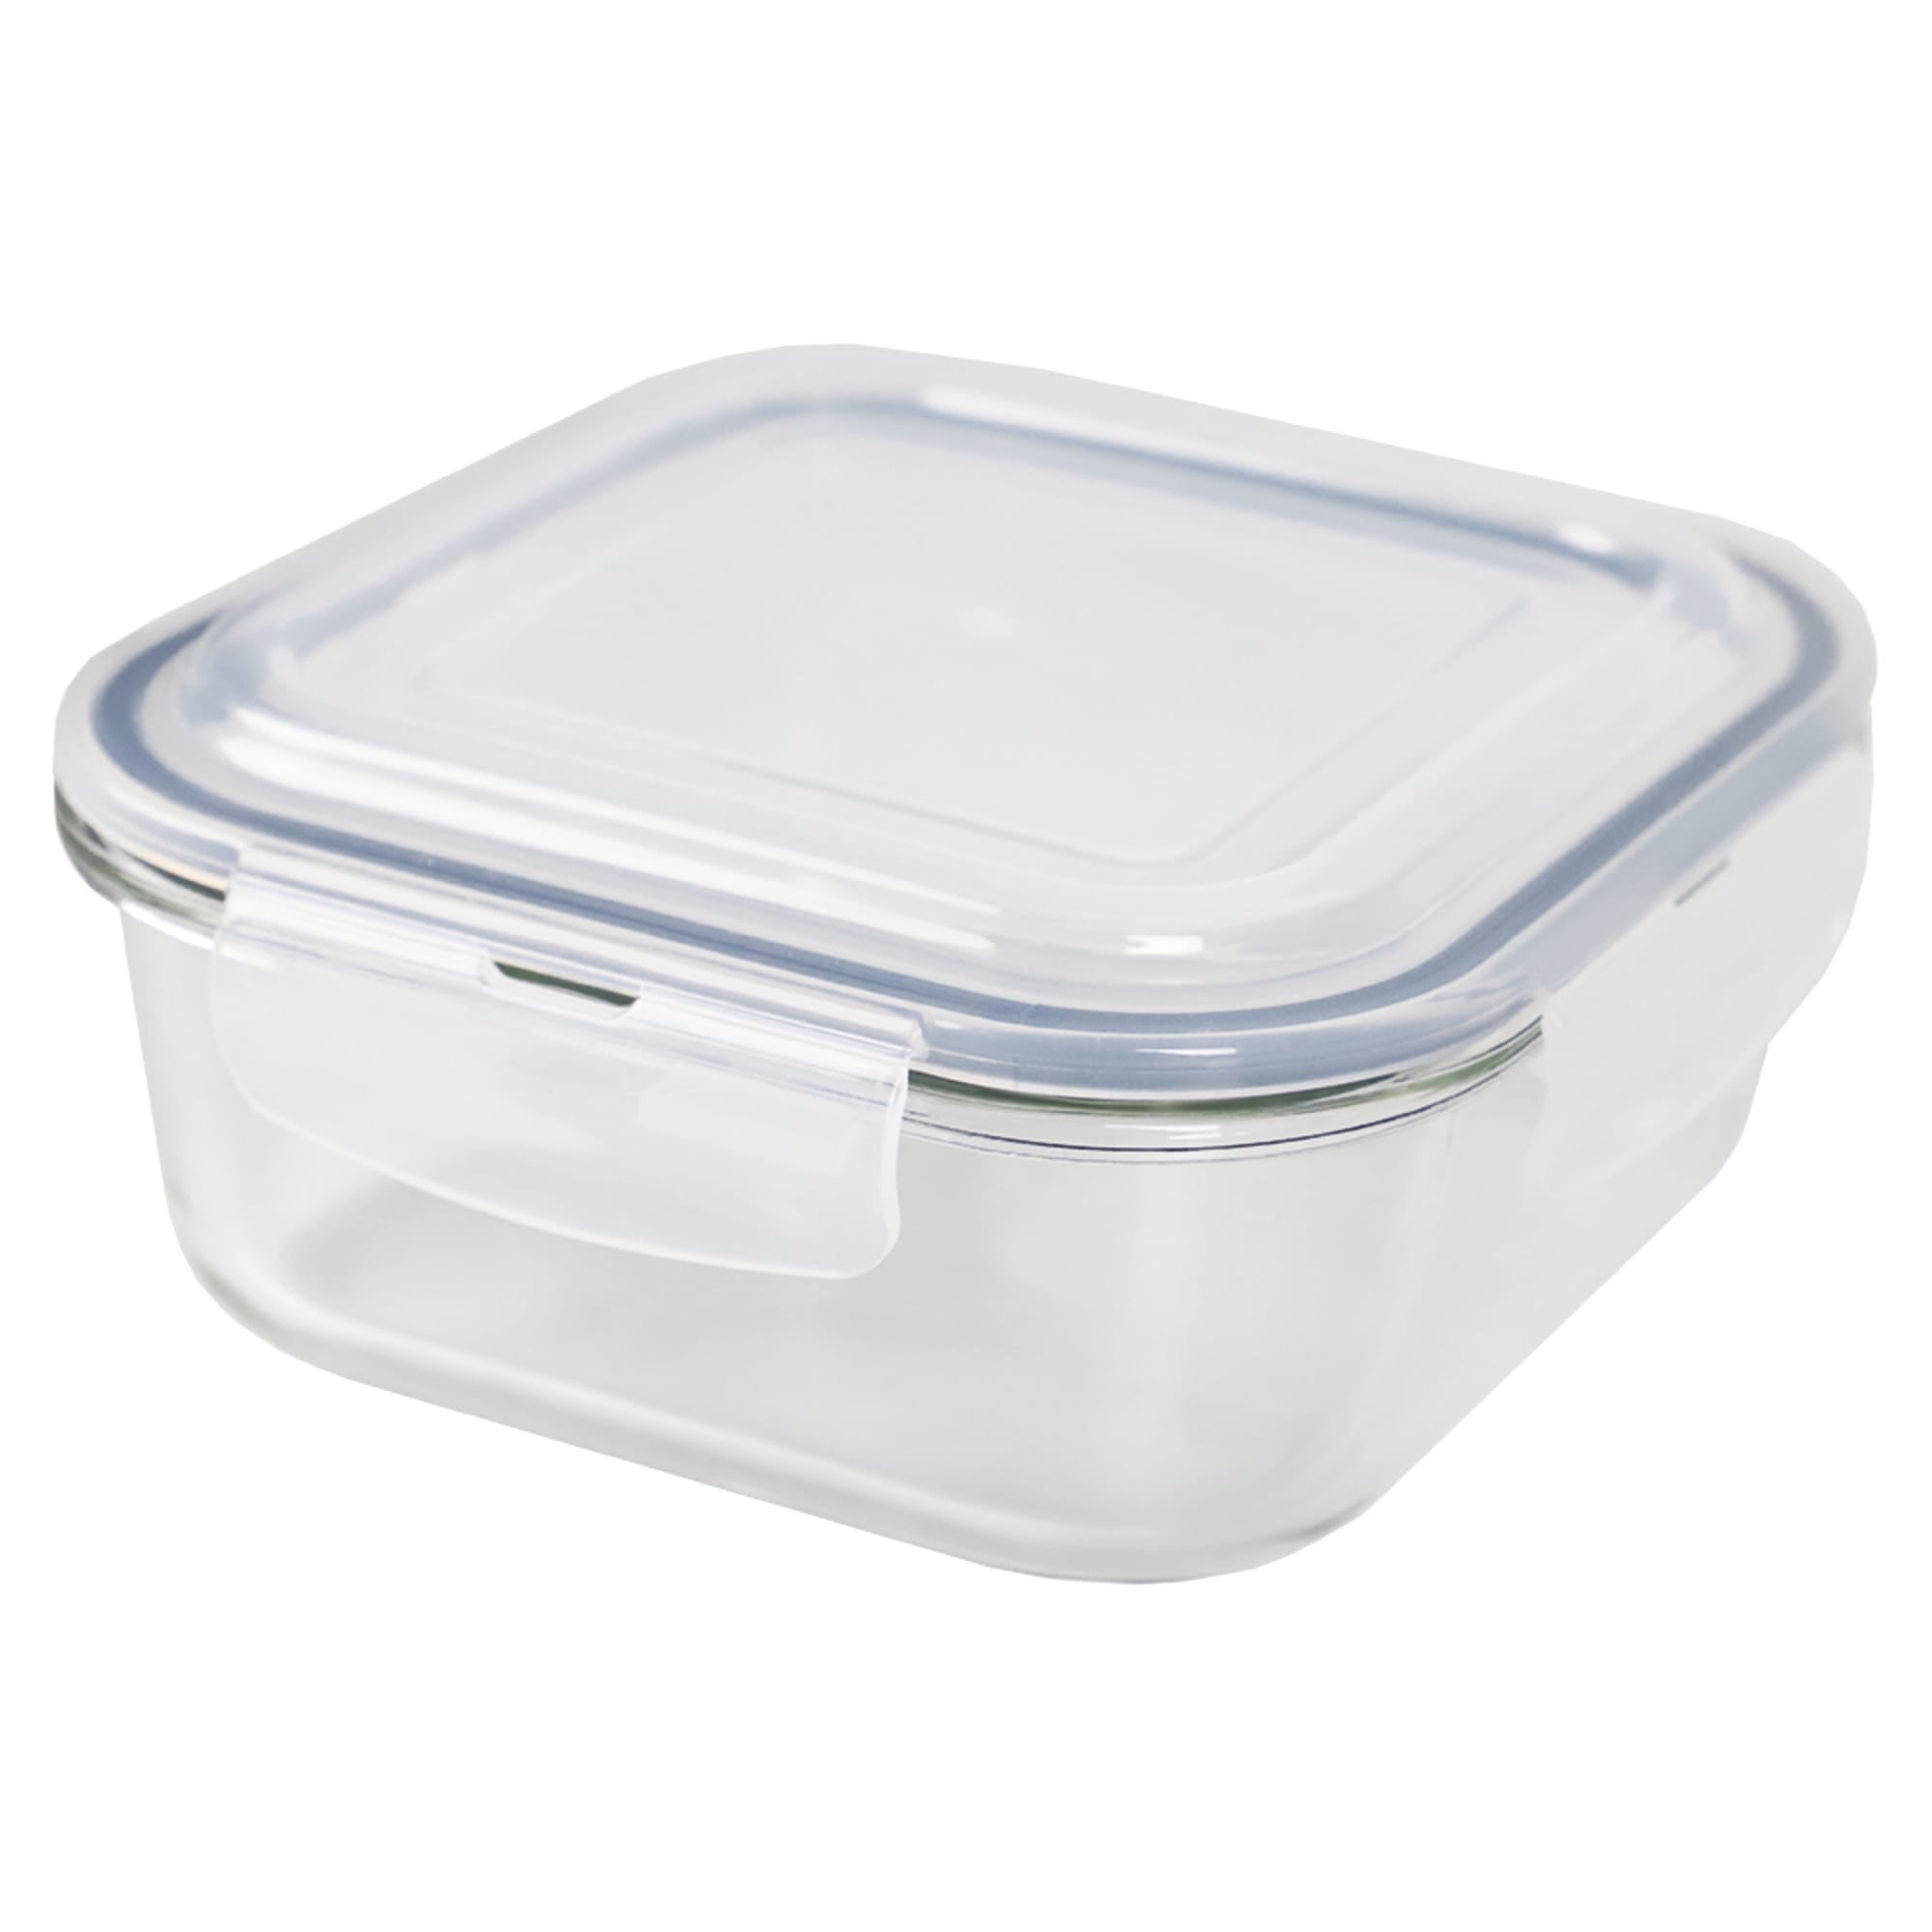 Michael Graves Design 40 Ounce High Borosilicate Glass Rectangle Food Storage Container with Indigo Rubber Seal $7.00 EACH, CASE PACK OF 12